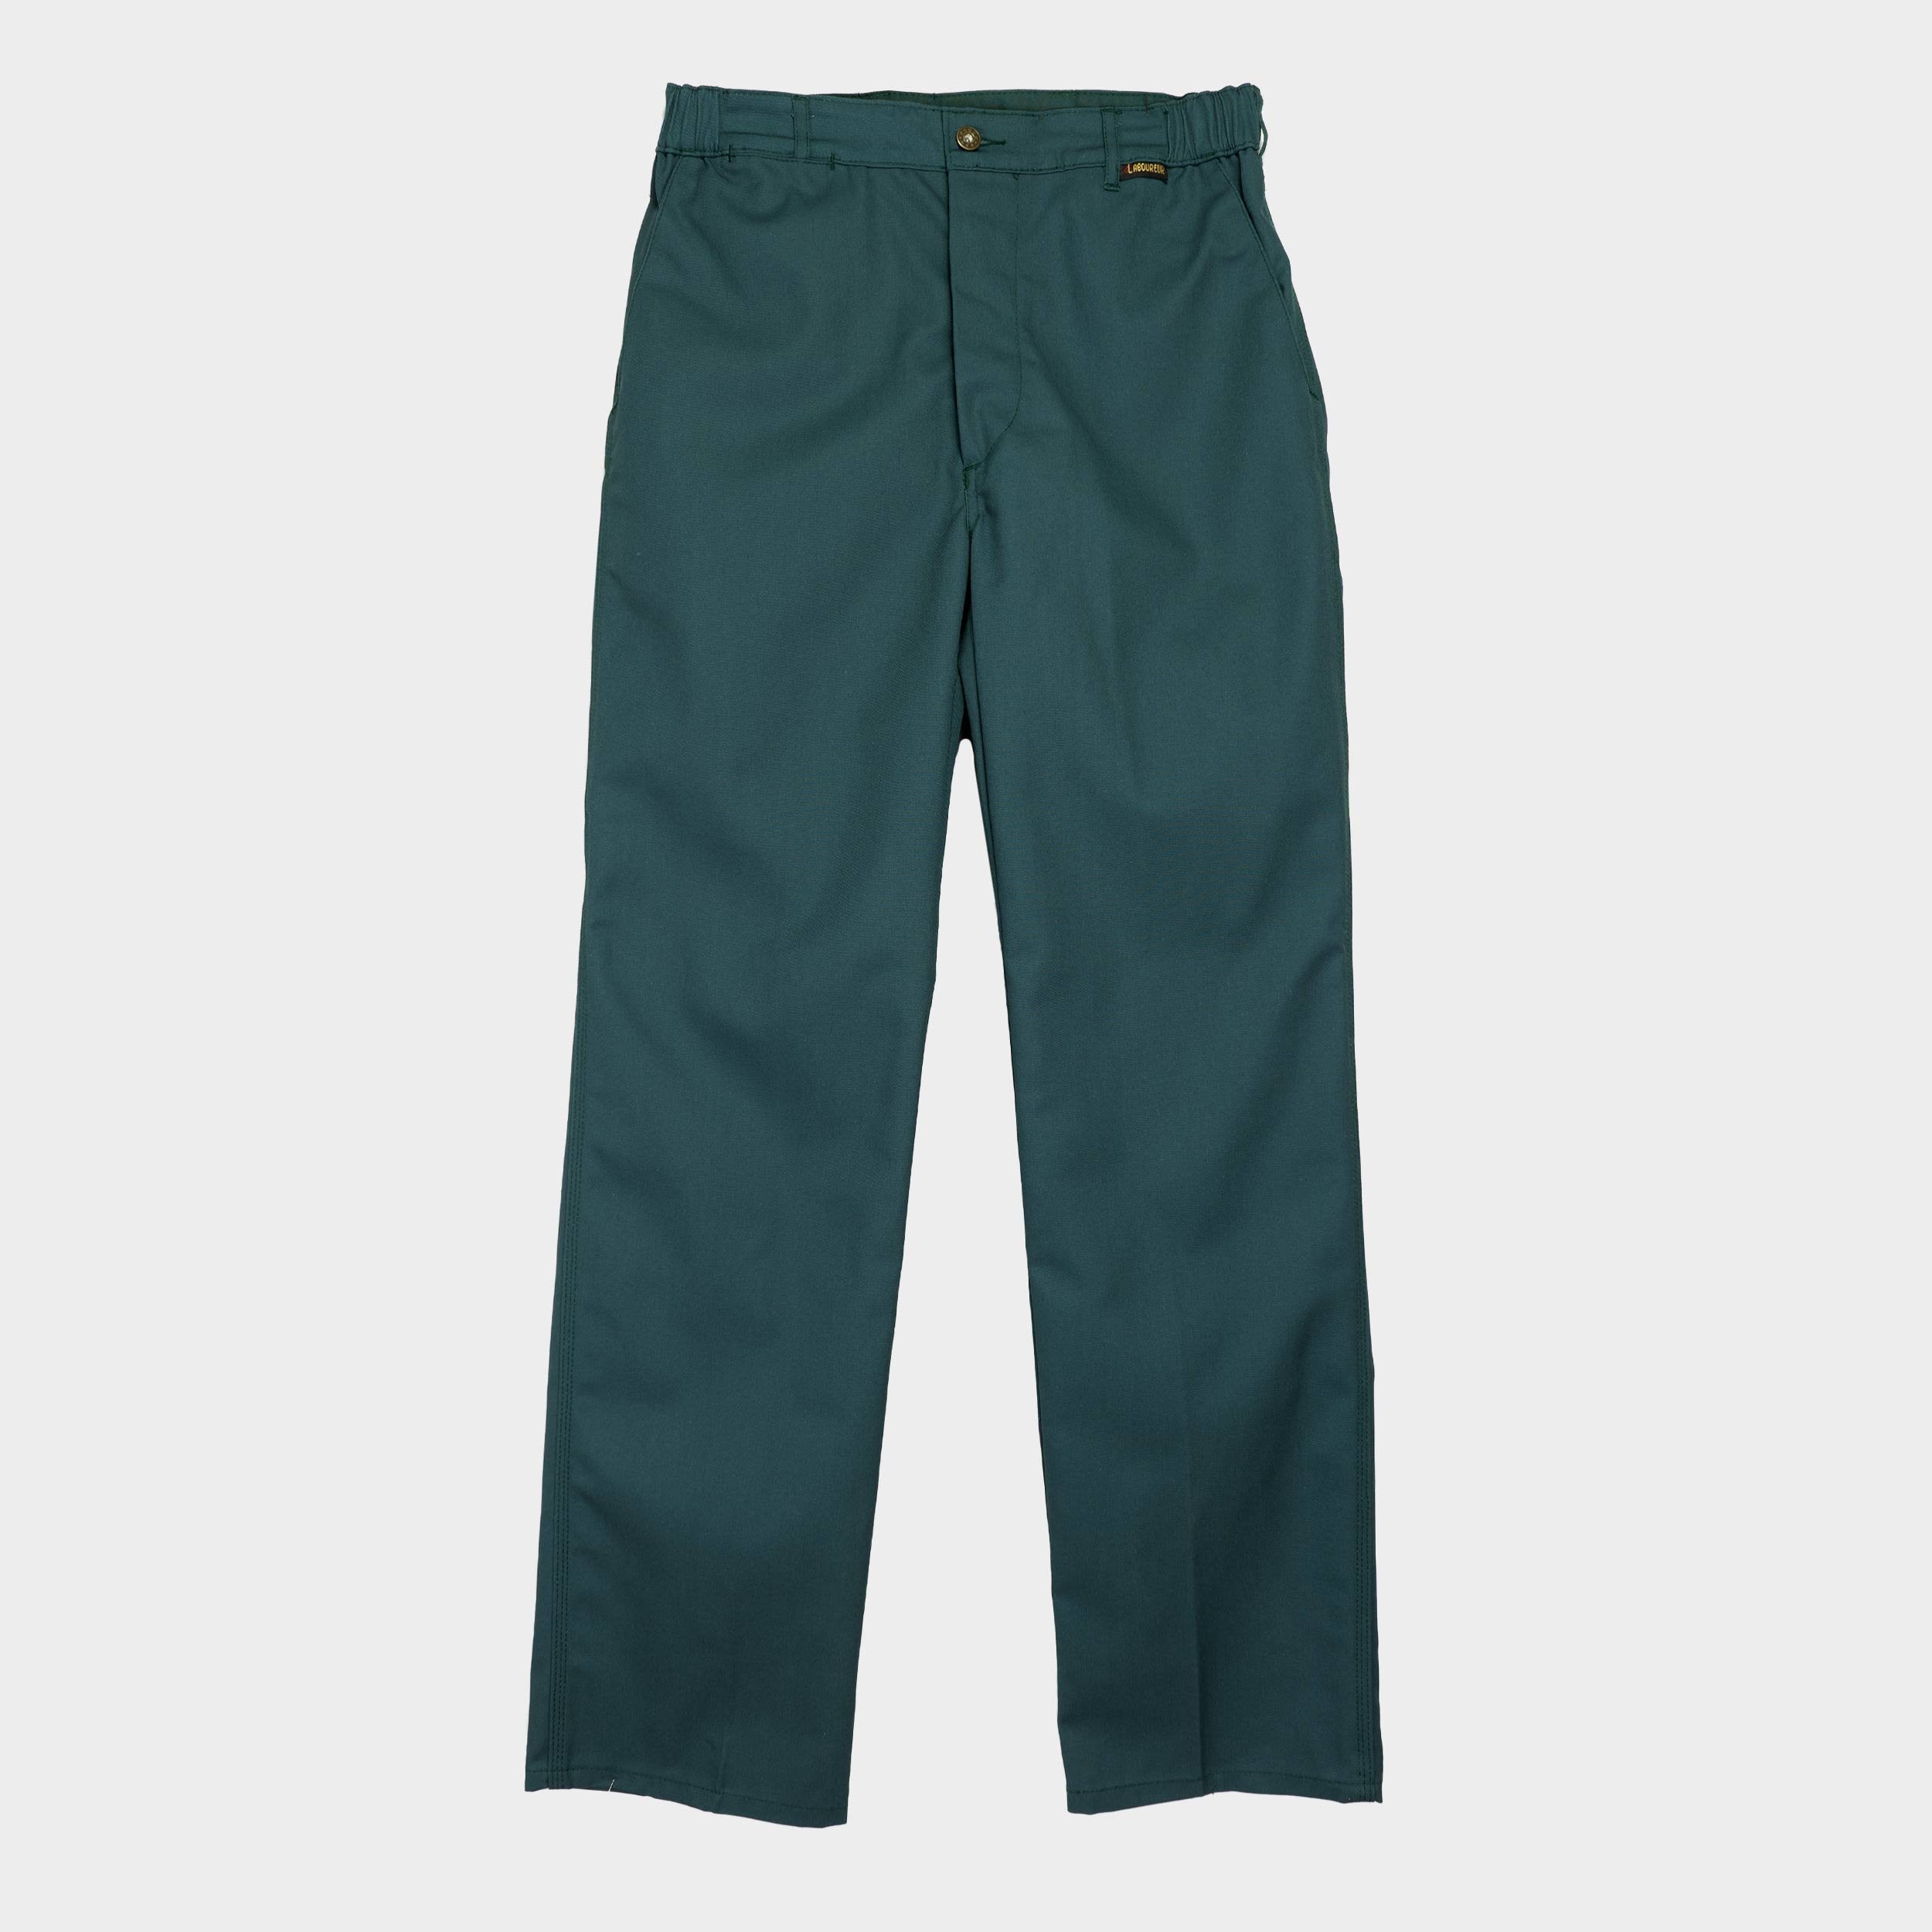 Le Laboureur French Cotton Blend  Work Pant in French Green